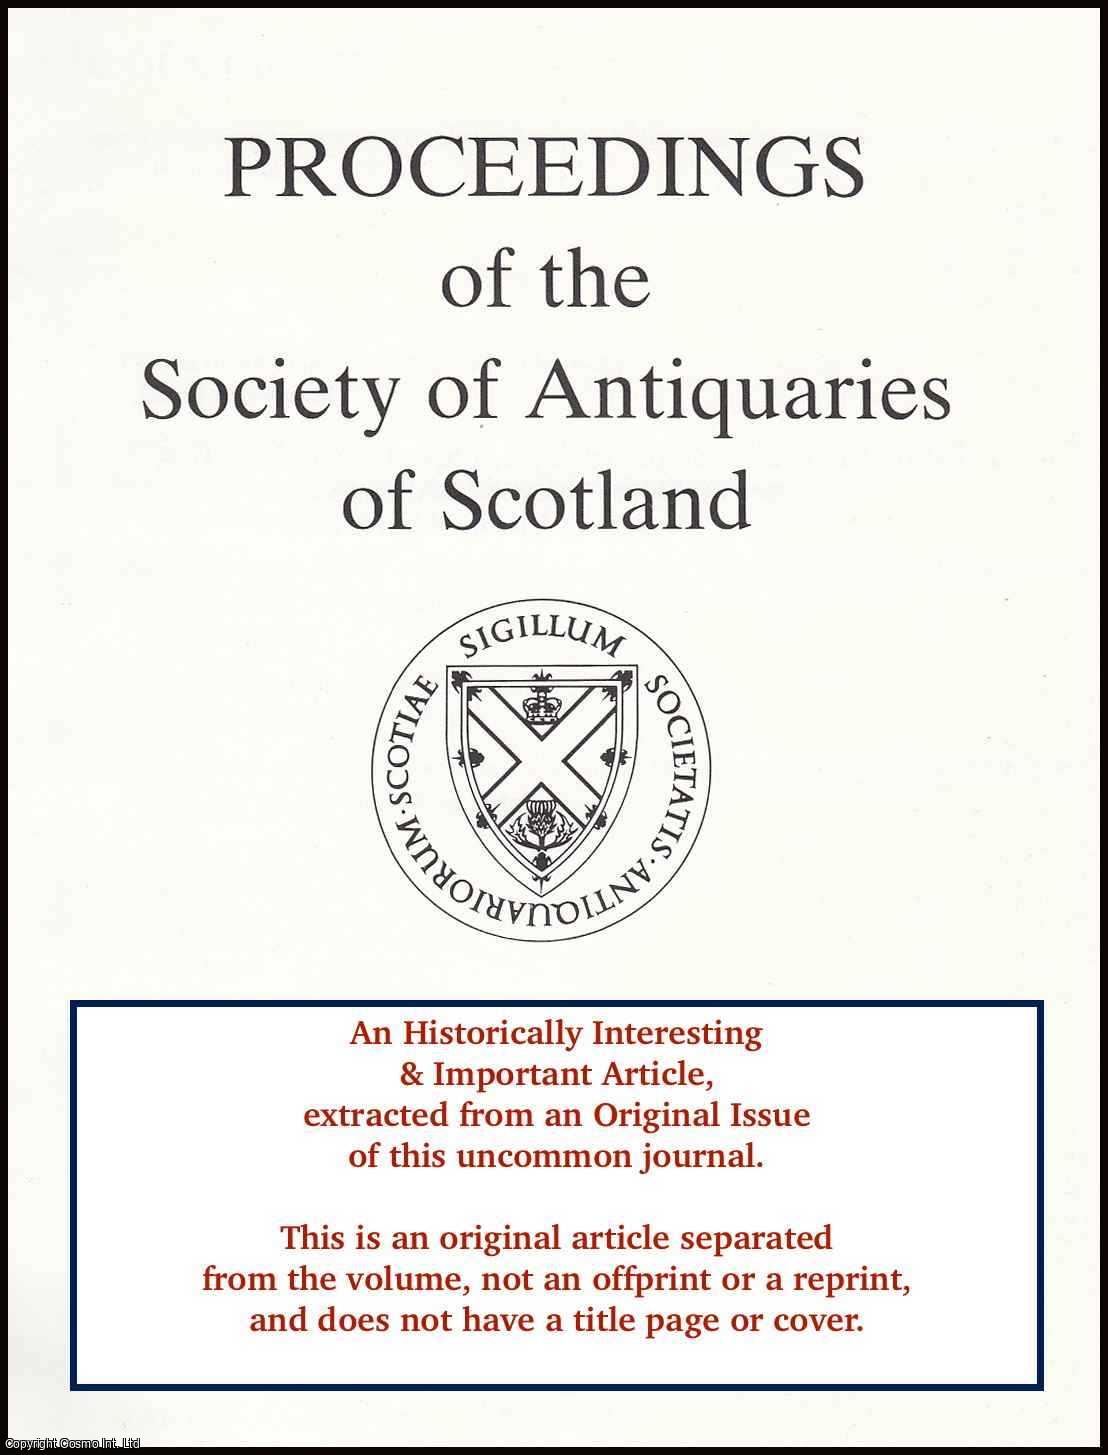 Stephen Carter - Tulloch Wood, Forres, Moray: The Survey and Dating of a Fragment of Prehistoric Landscape. An original article from the Proceedings of the Society of Antiquaries of Scotland, 1993.